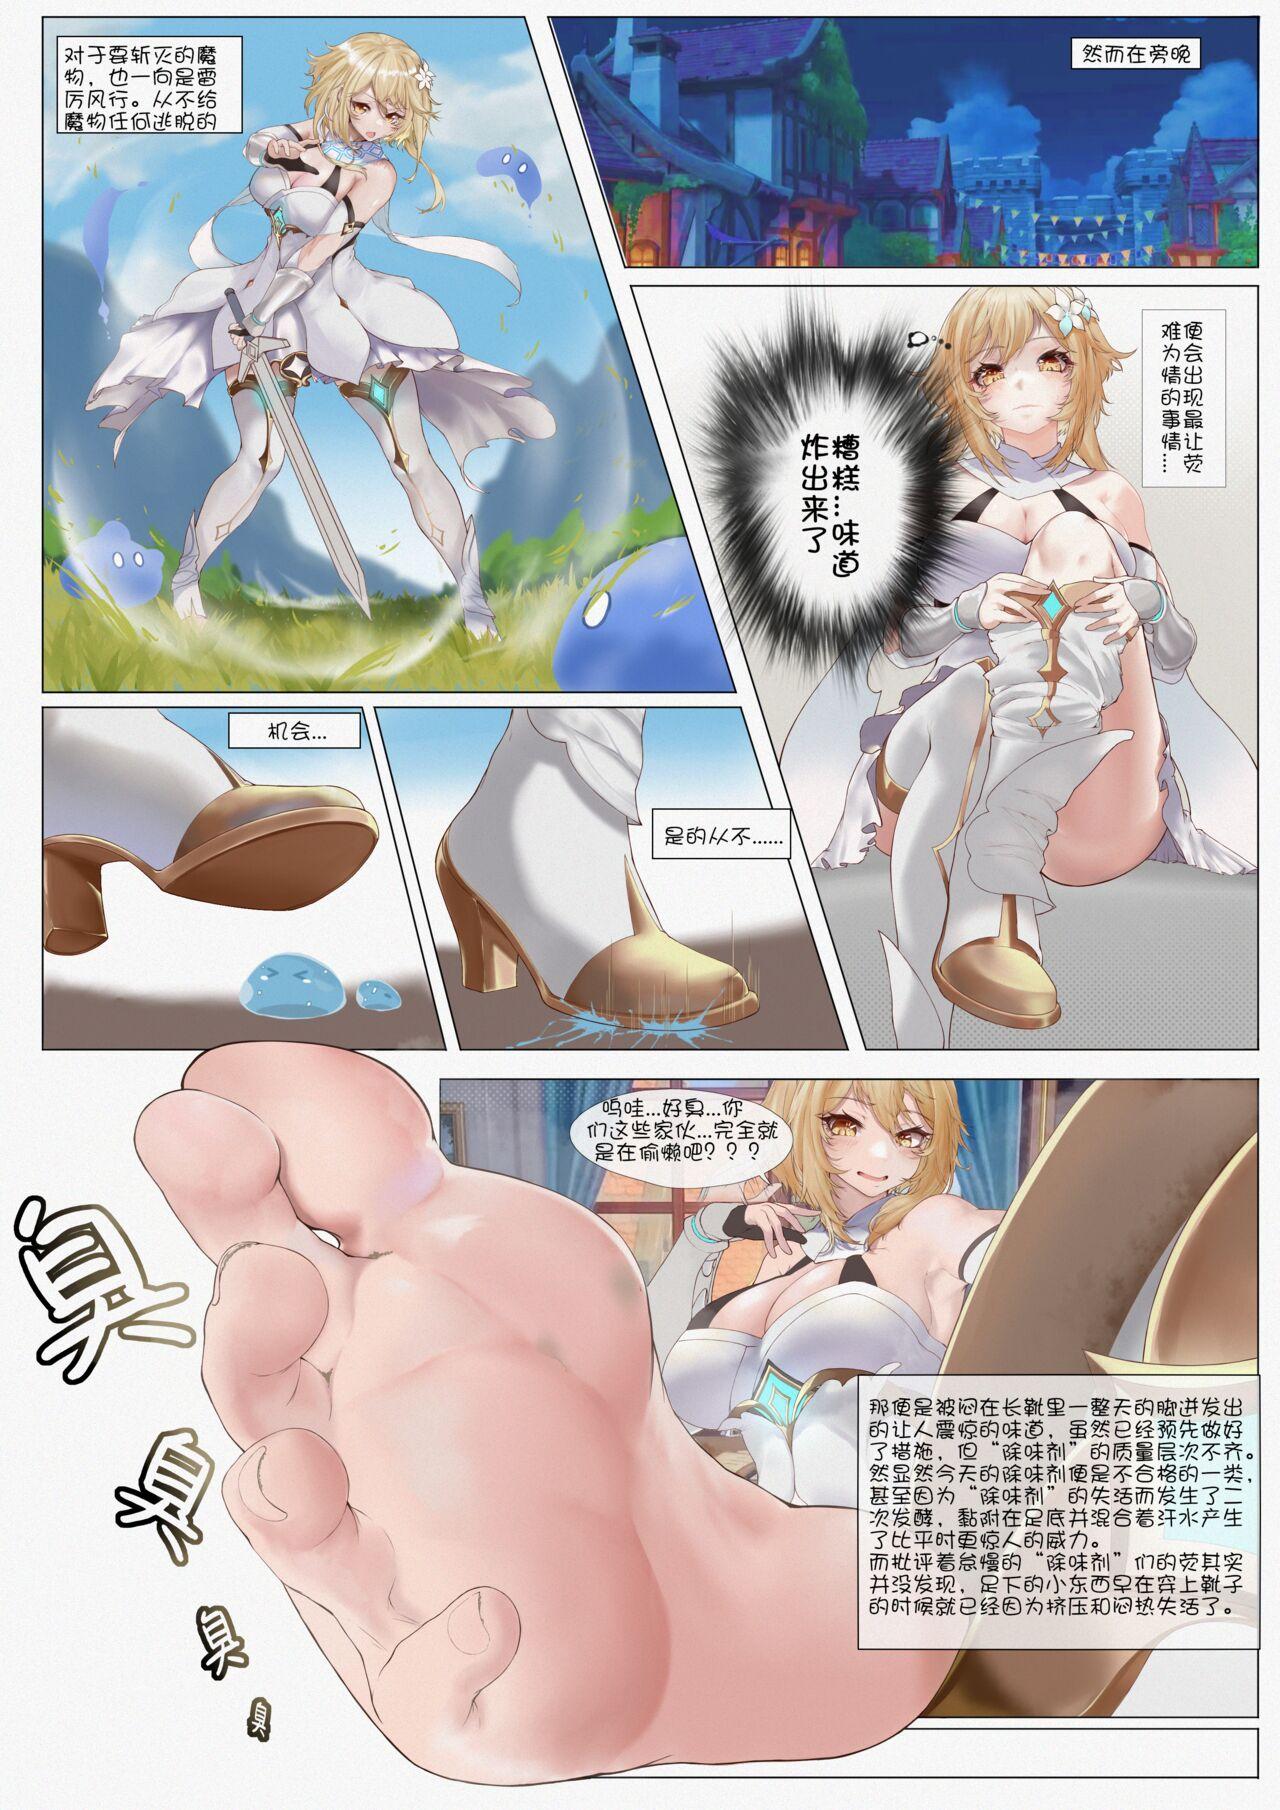 Whipping Just A Little Daily Story About Lumine - Genshin impact Sex Toys - Page 3